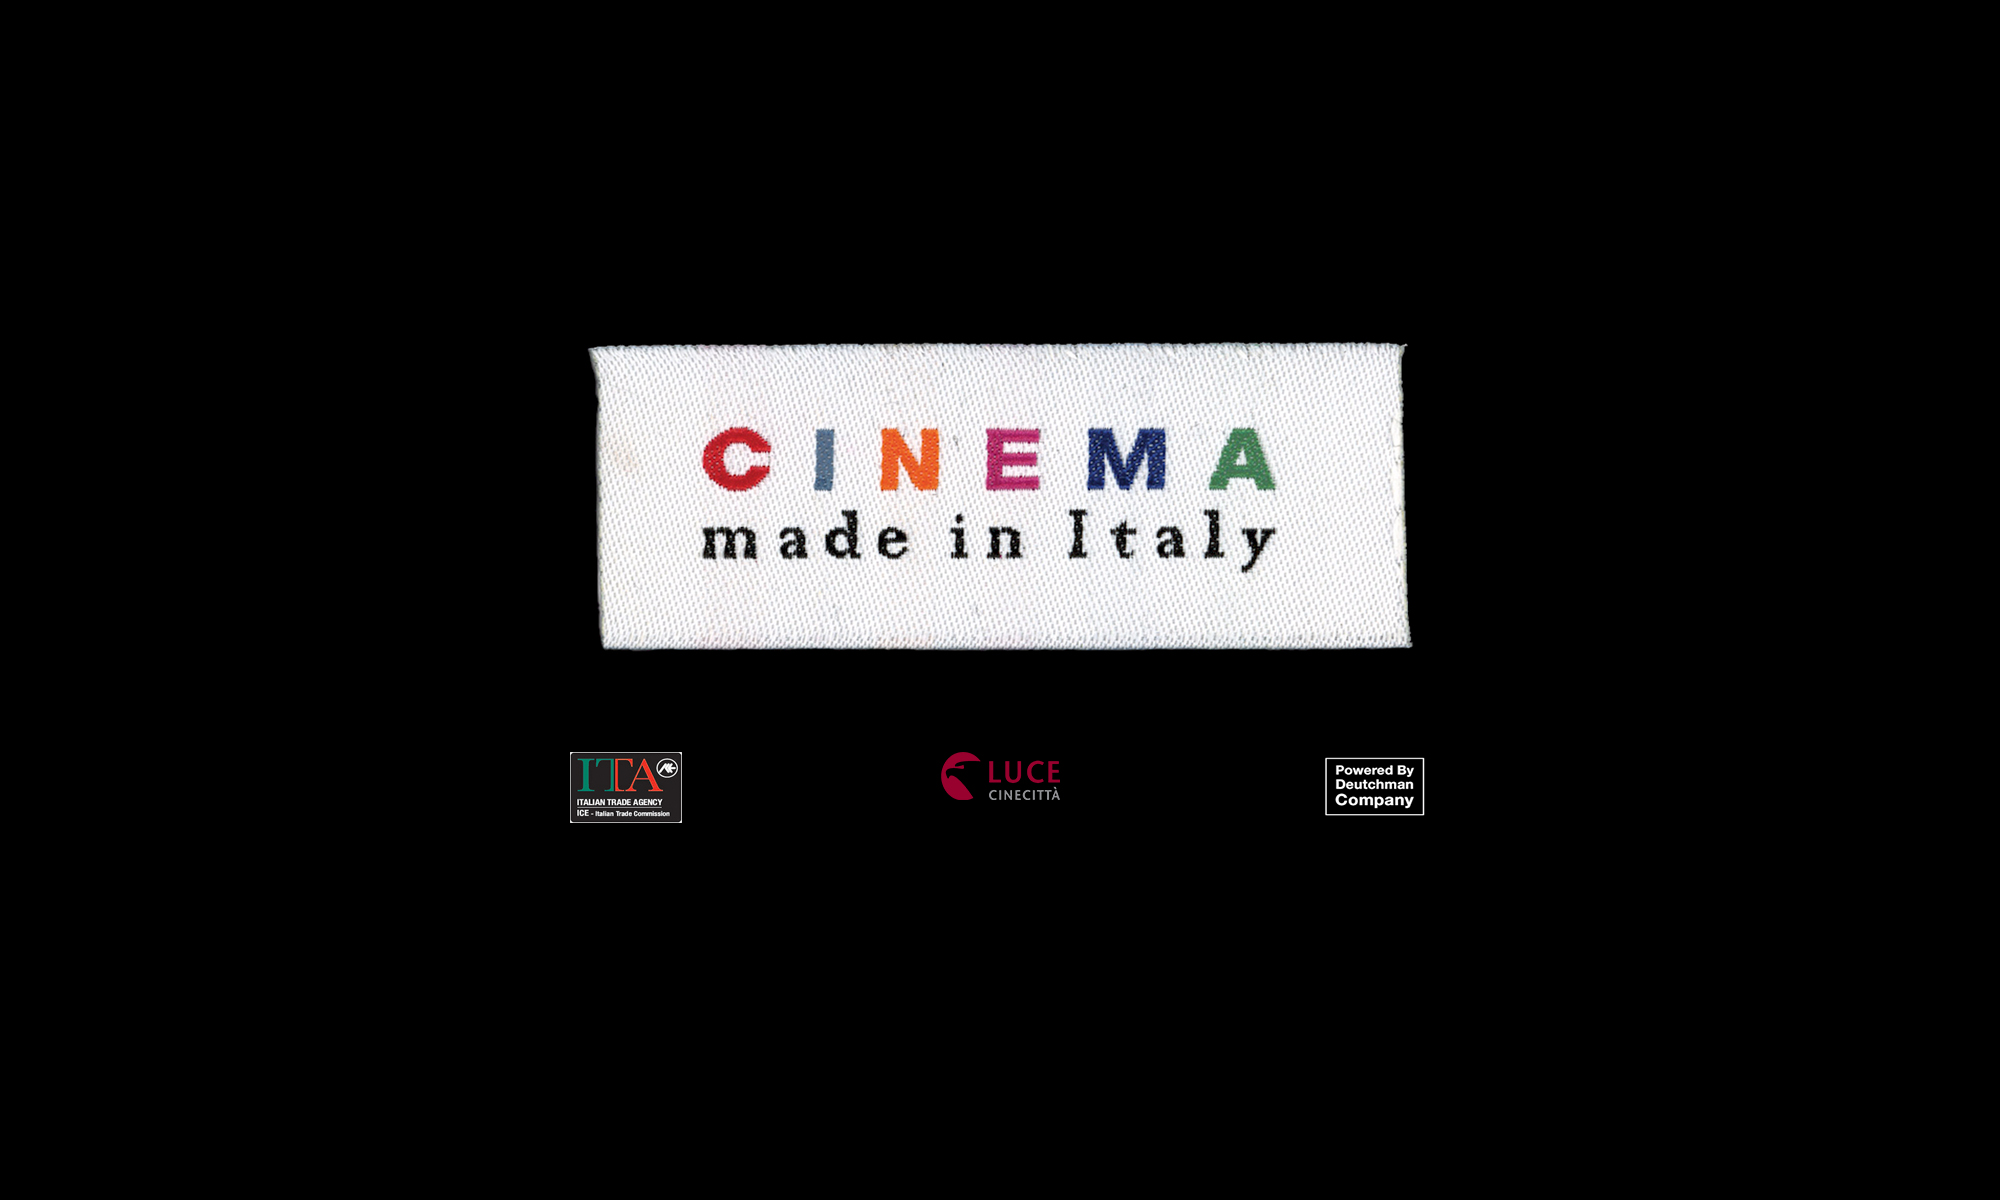 Cinema Made in Italy